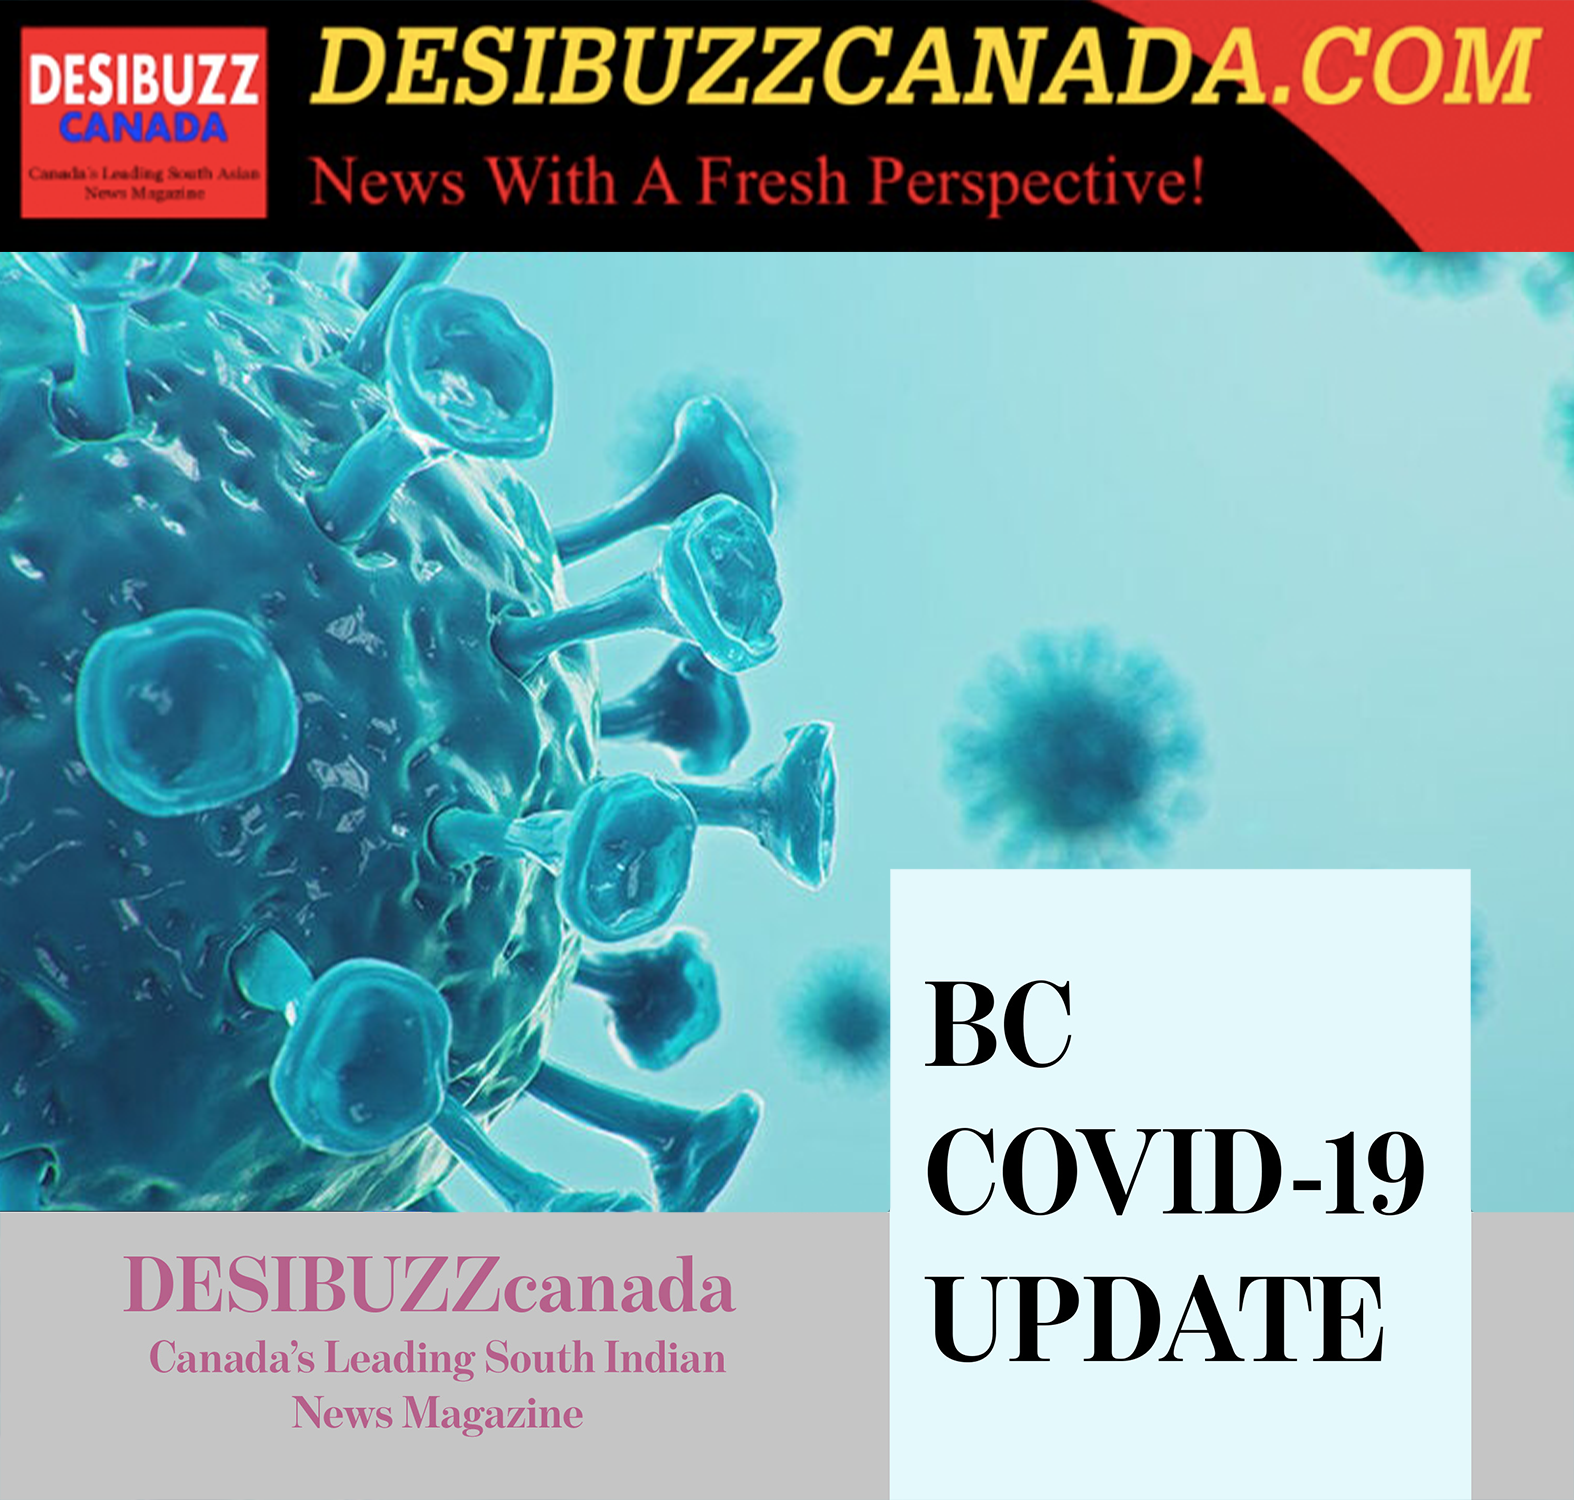 BC COVID-19 UPDATE: Nearly 300 Cases And Six Deaths Reported Wednesday